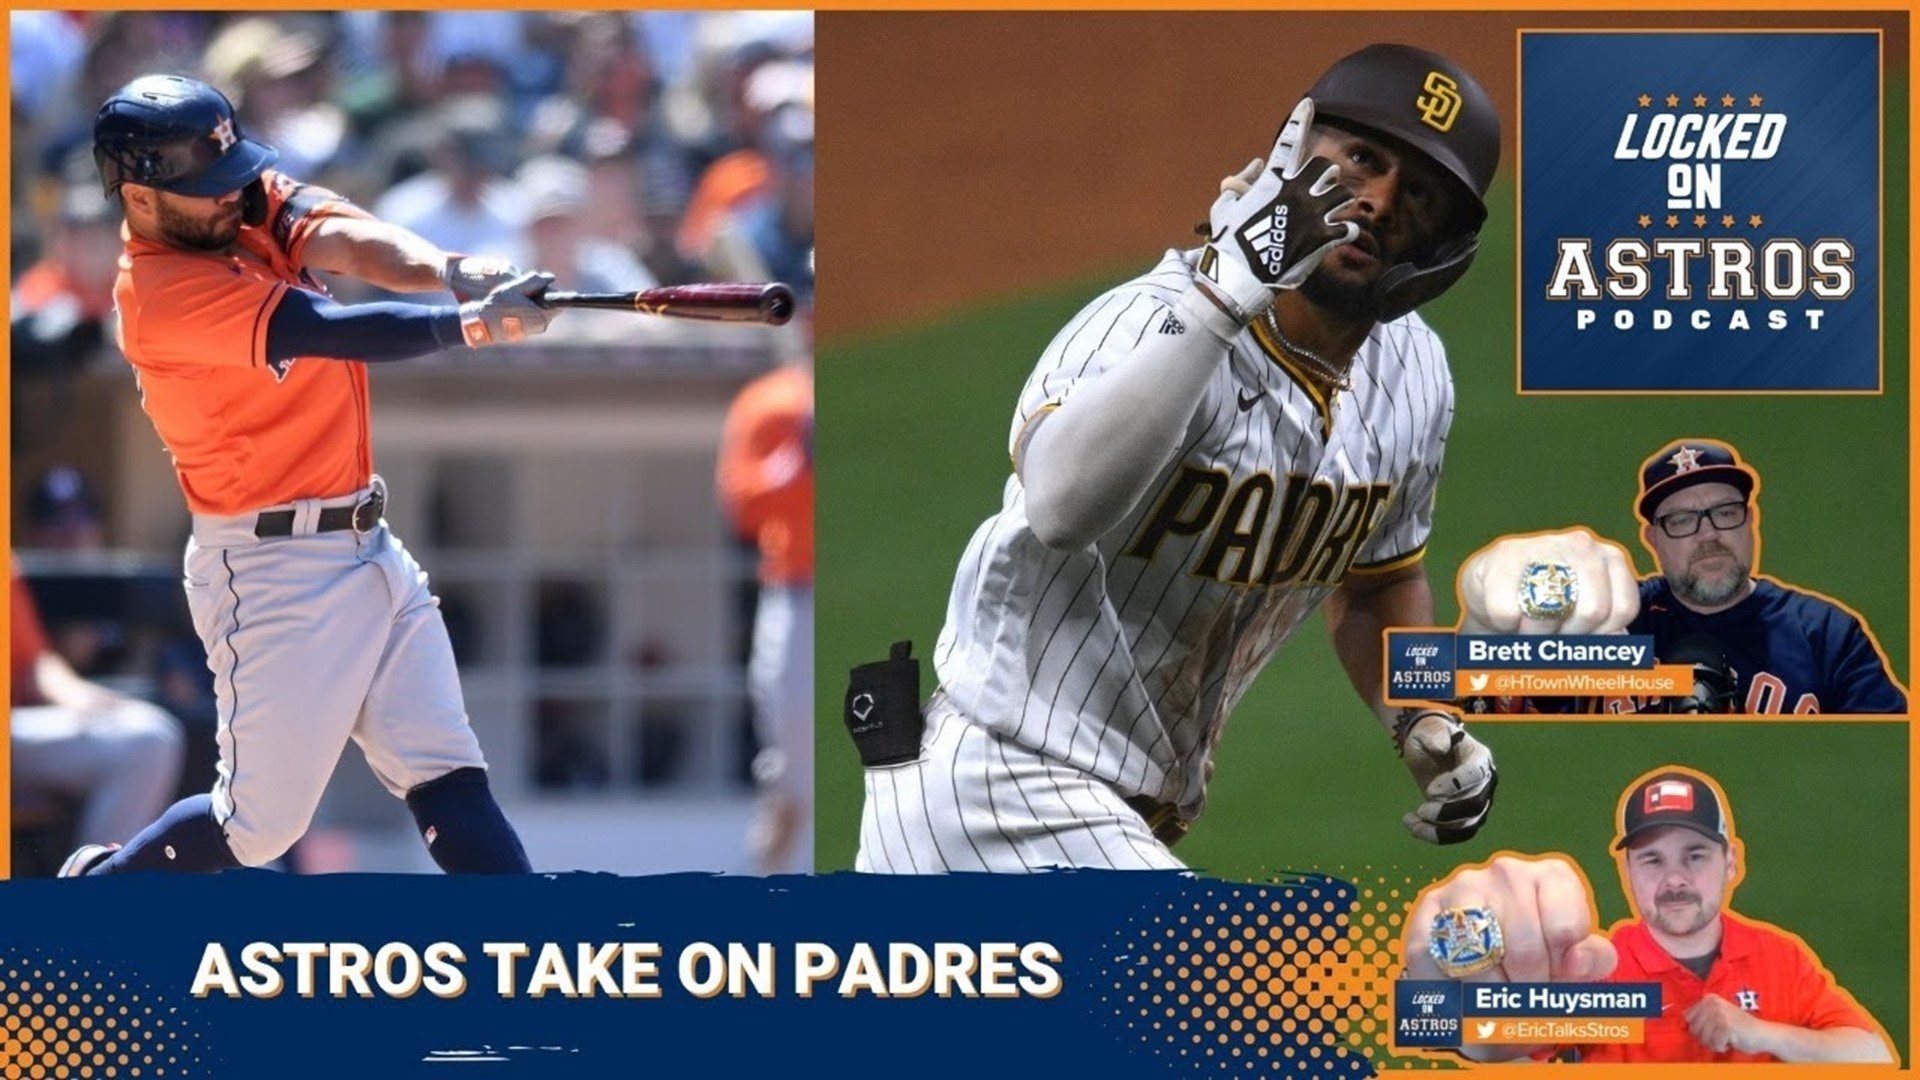 Astros return home to face Padres after historic series